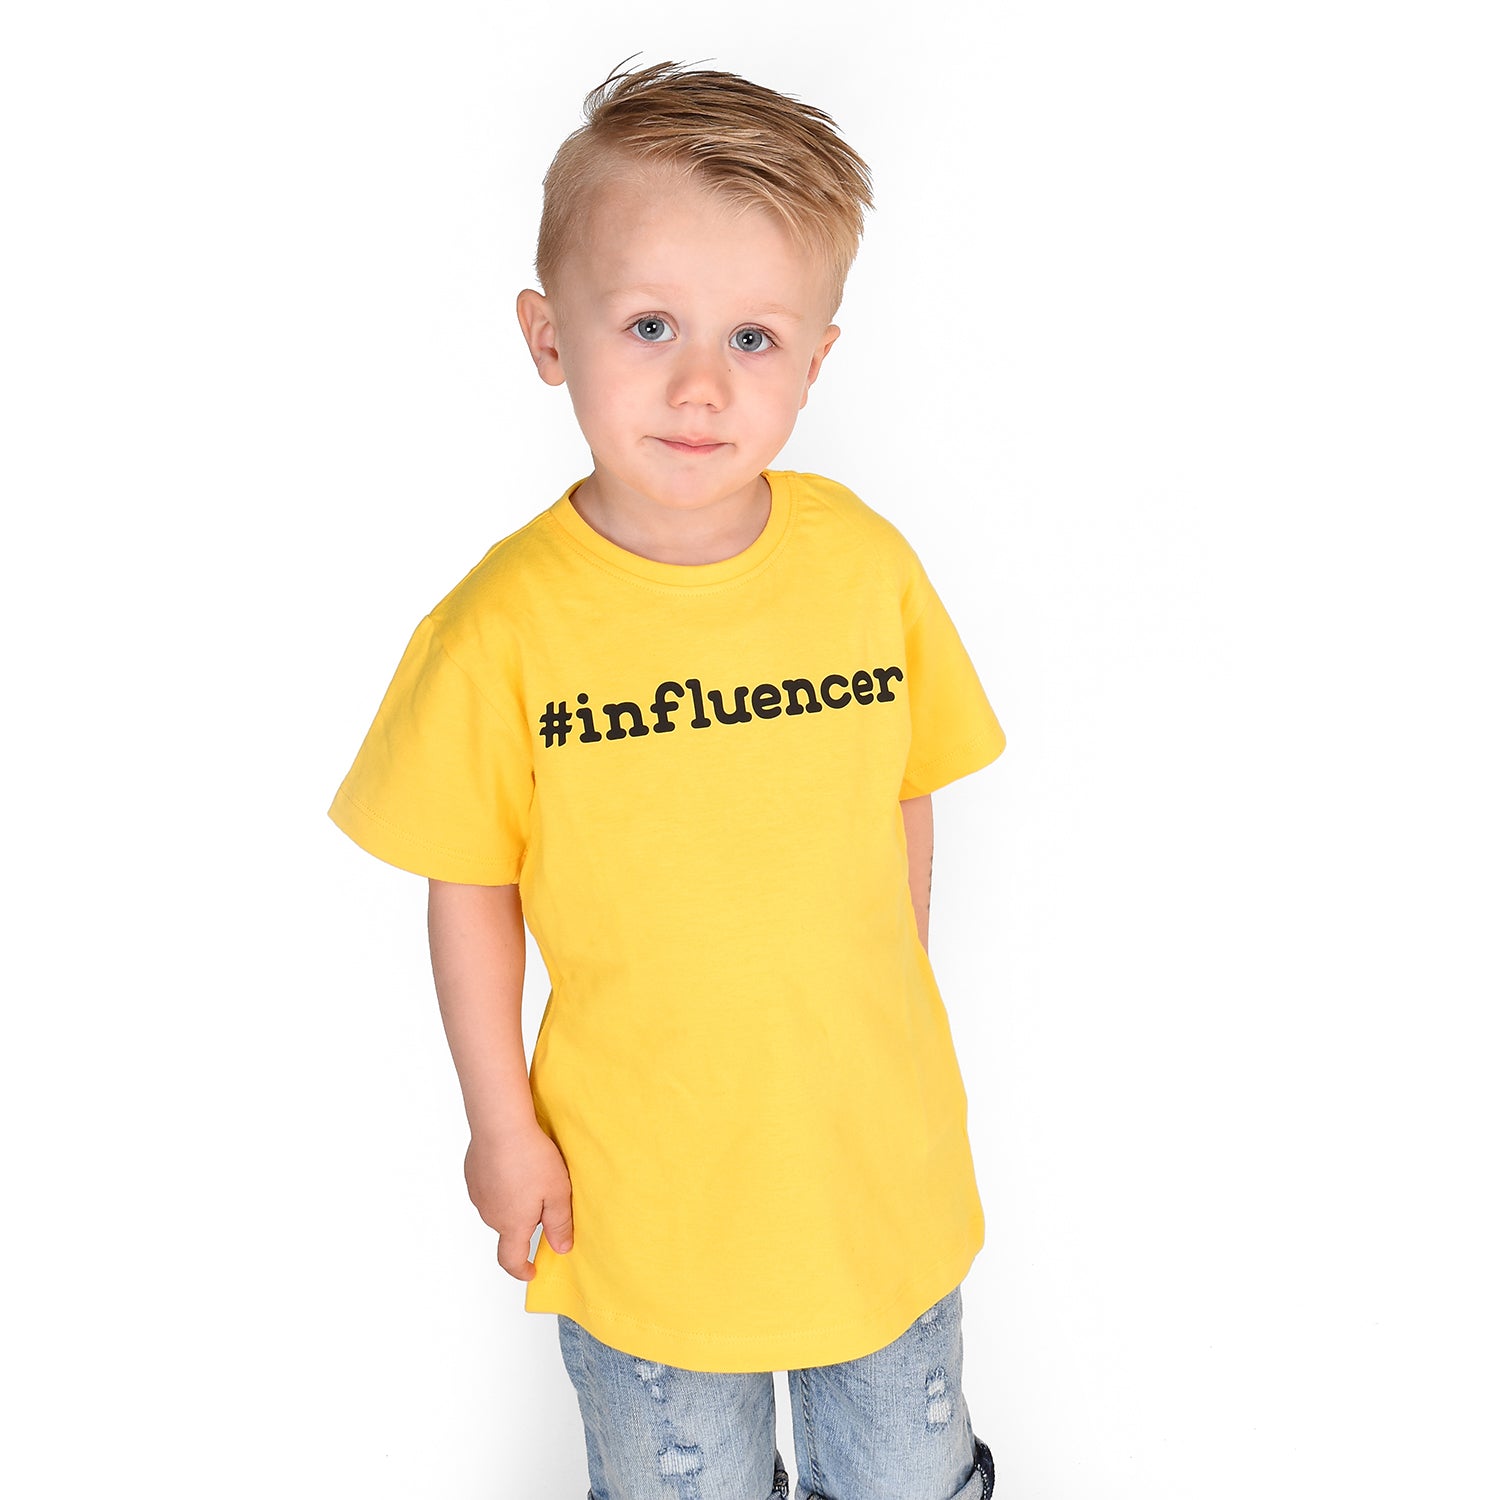 Blonde boy with yellow shirt, with '#influencer' print, by KMLeon.